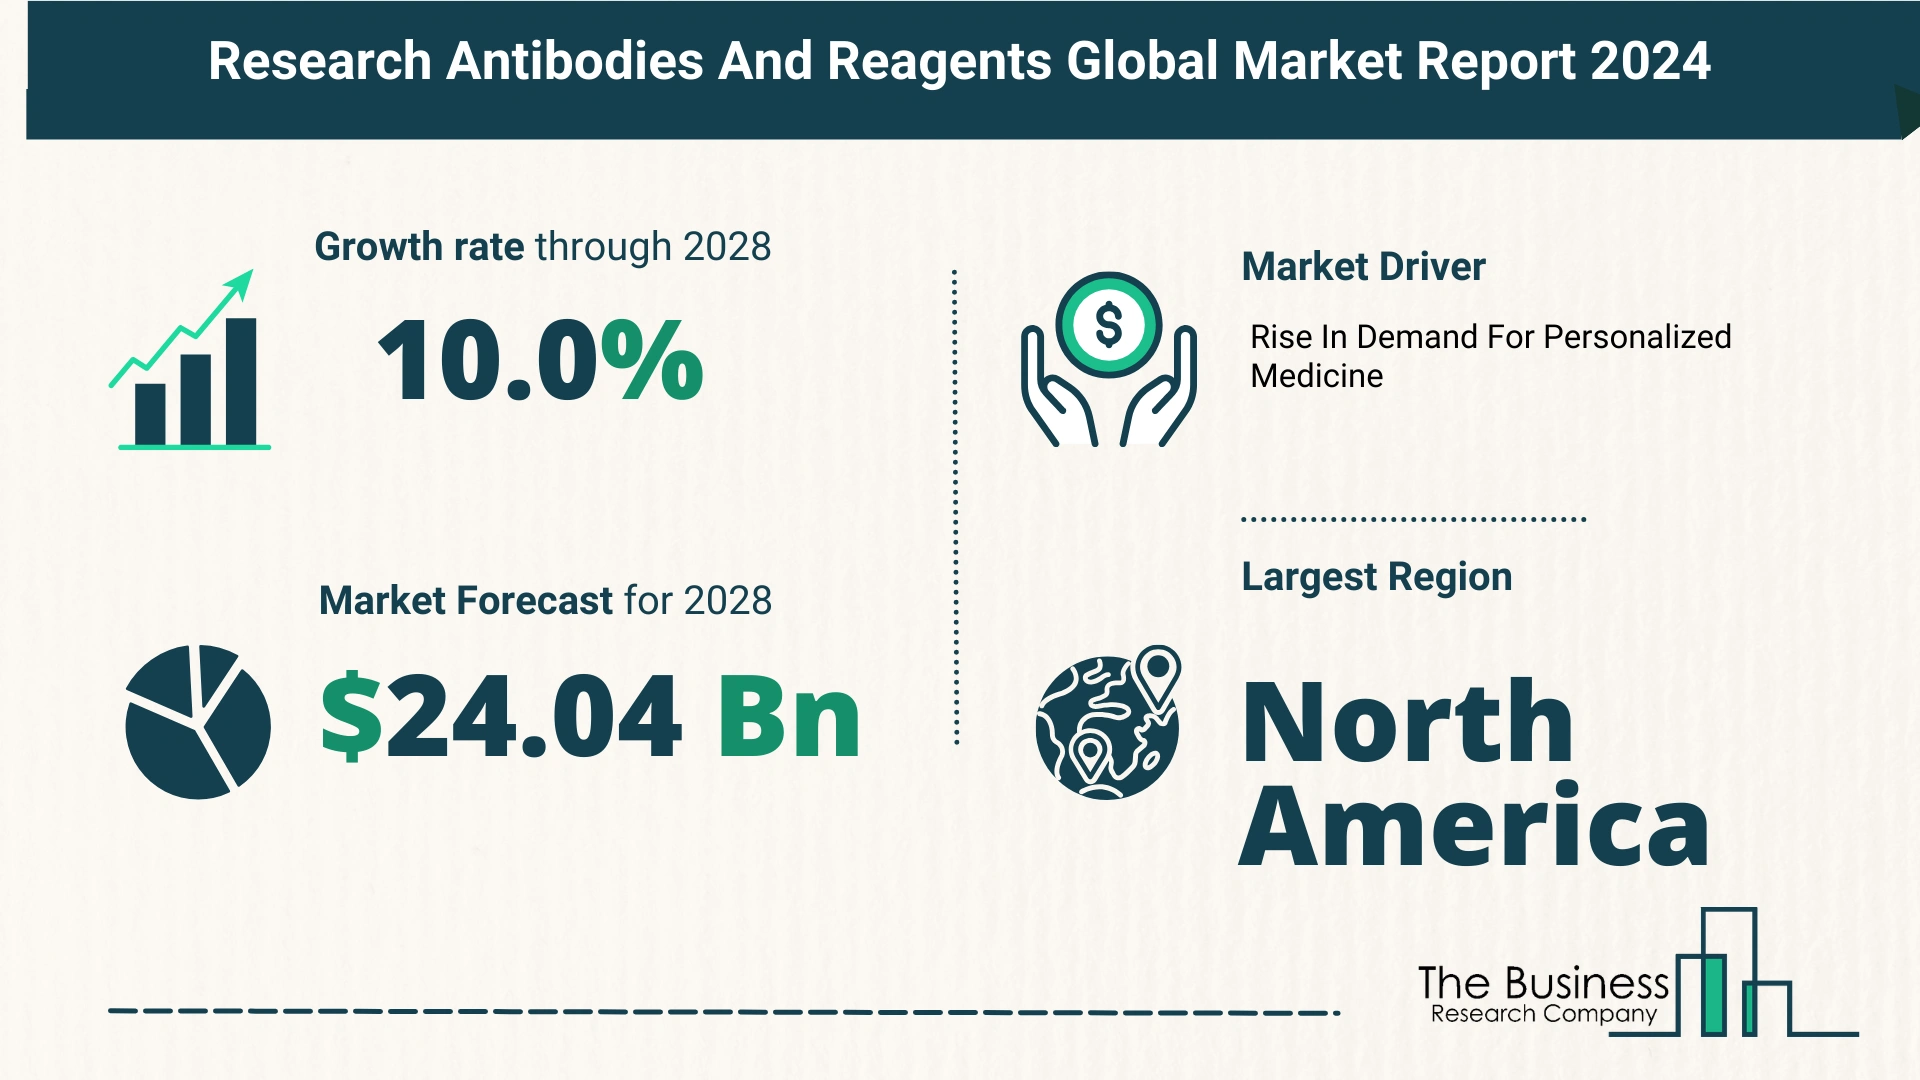 Global Research Antibodies and Reagents Market